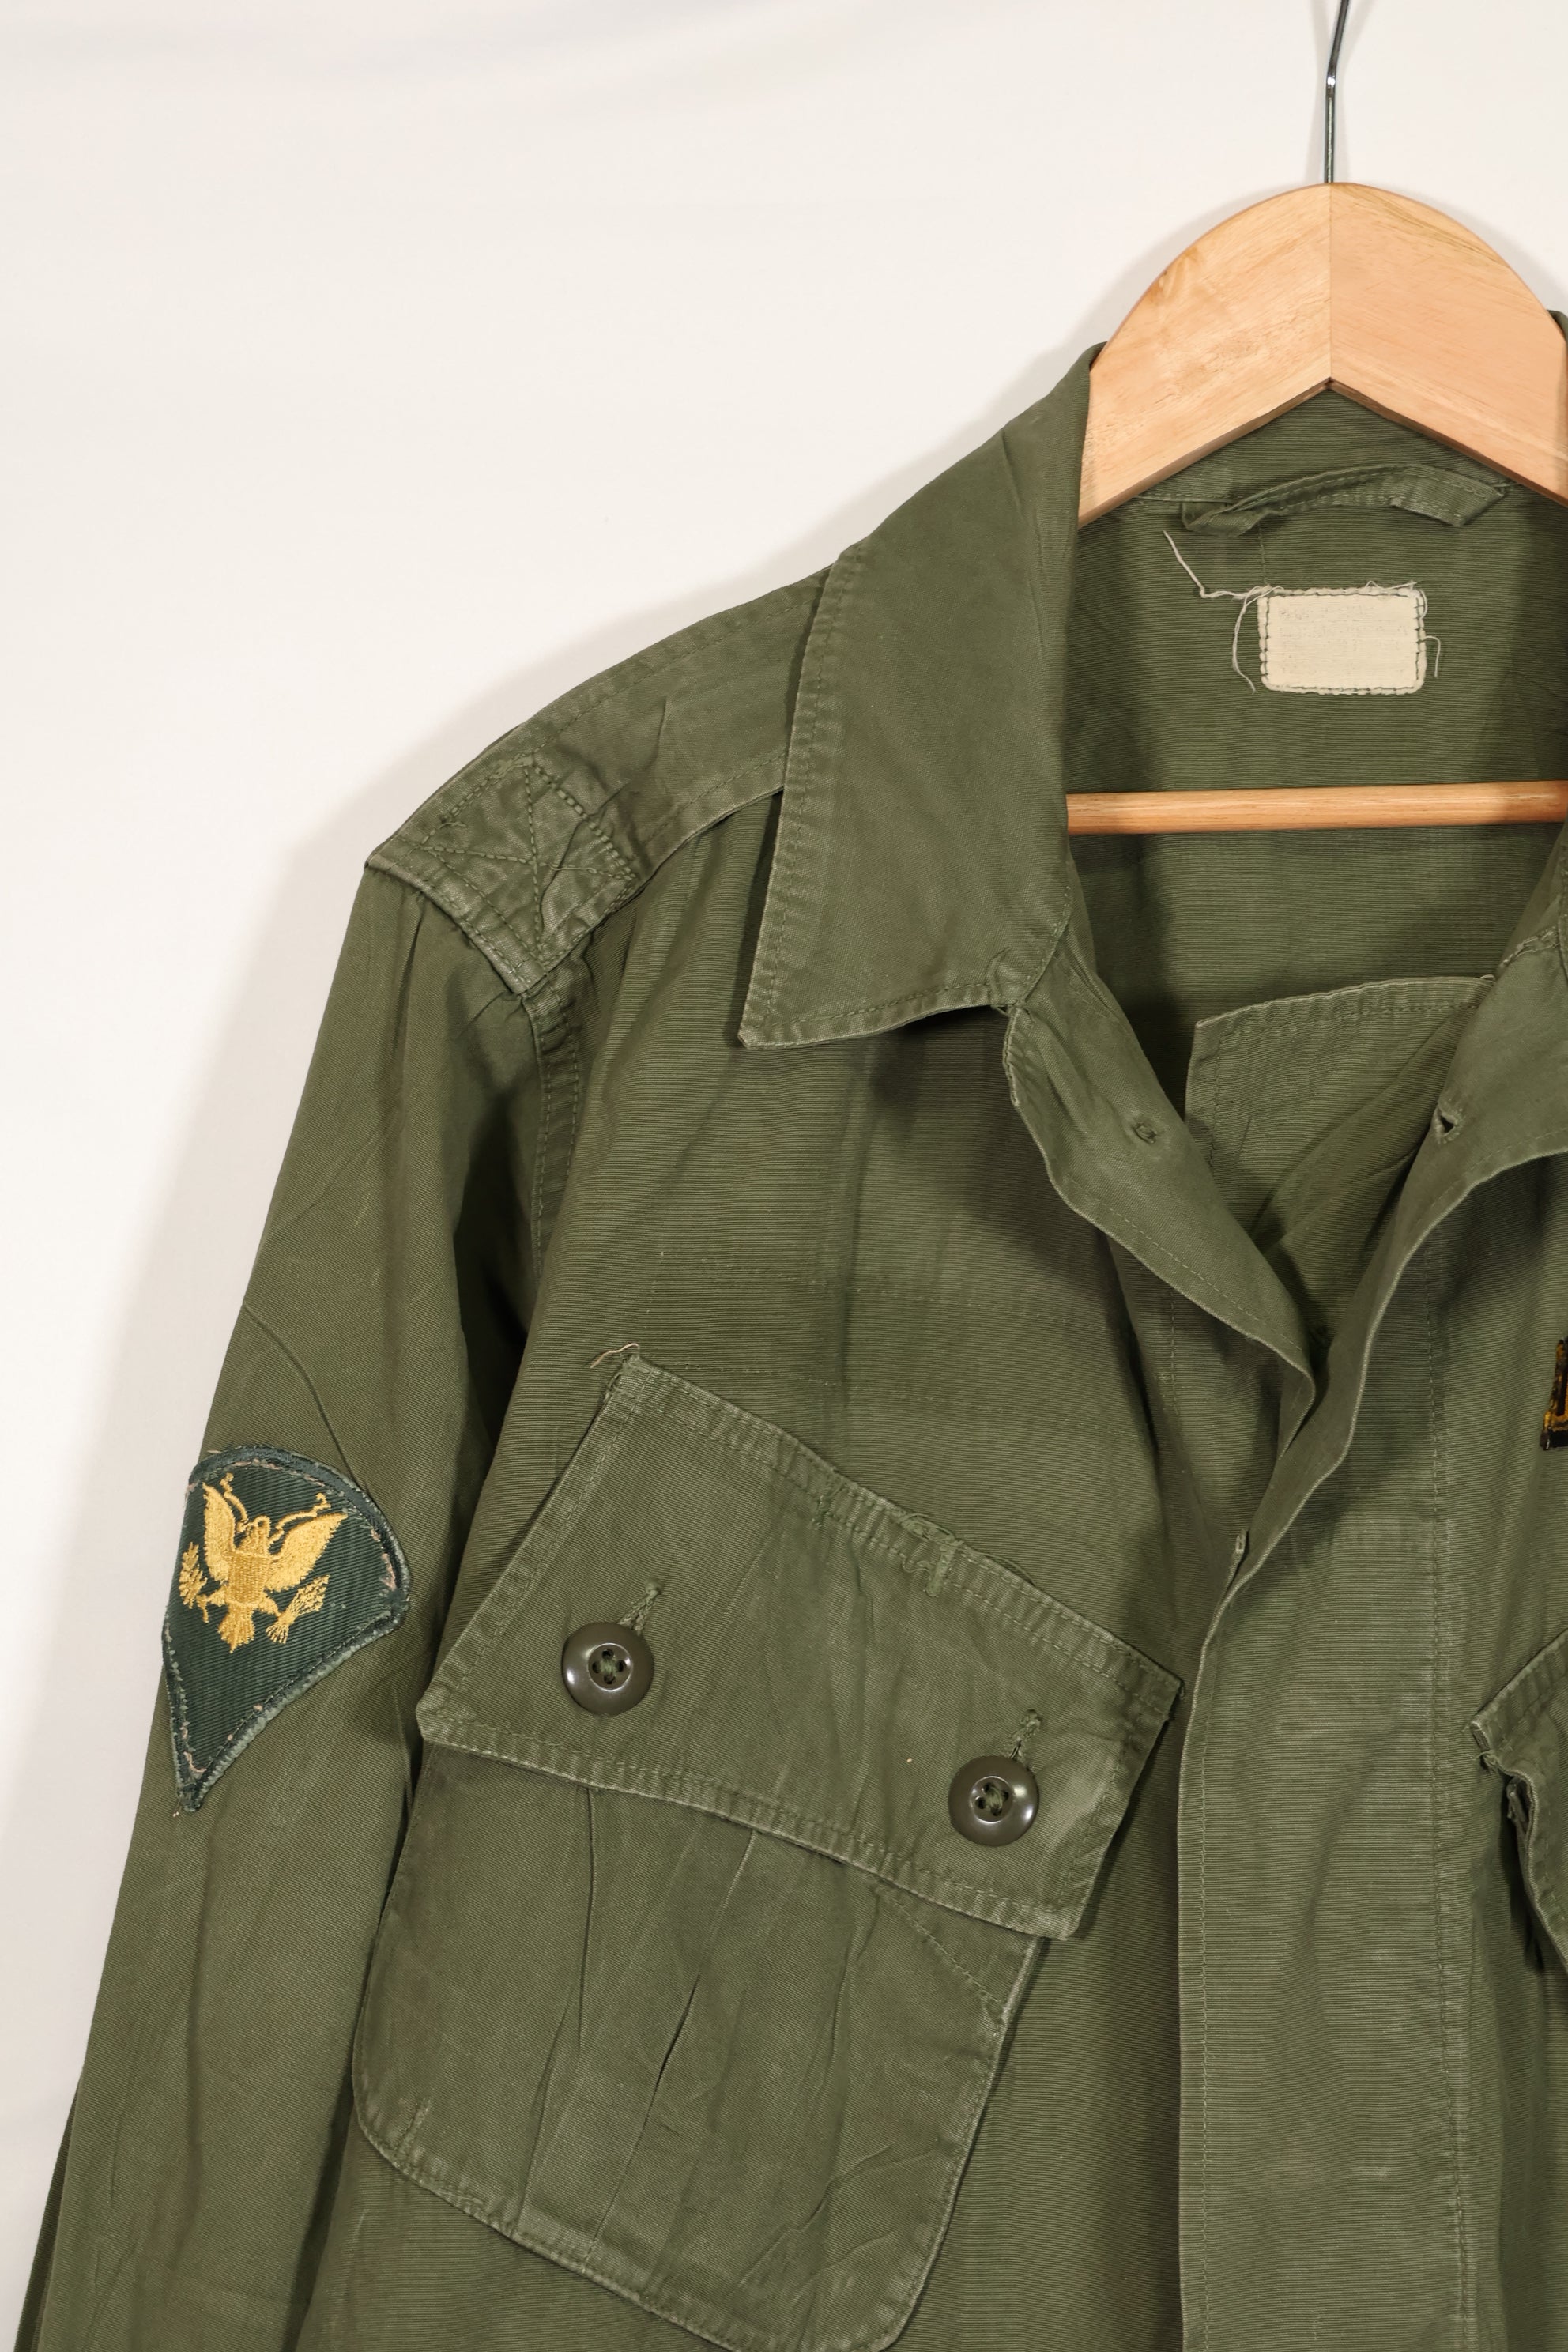 Real 1st Model Jungle Fatigue Jacket with patch, used.